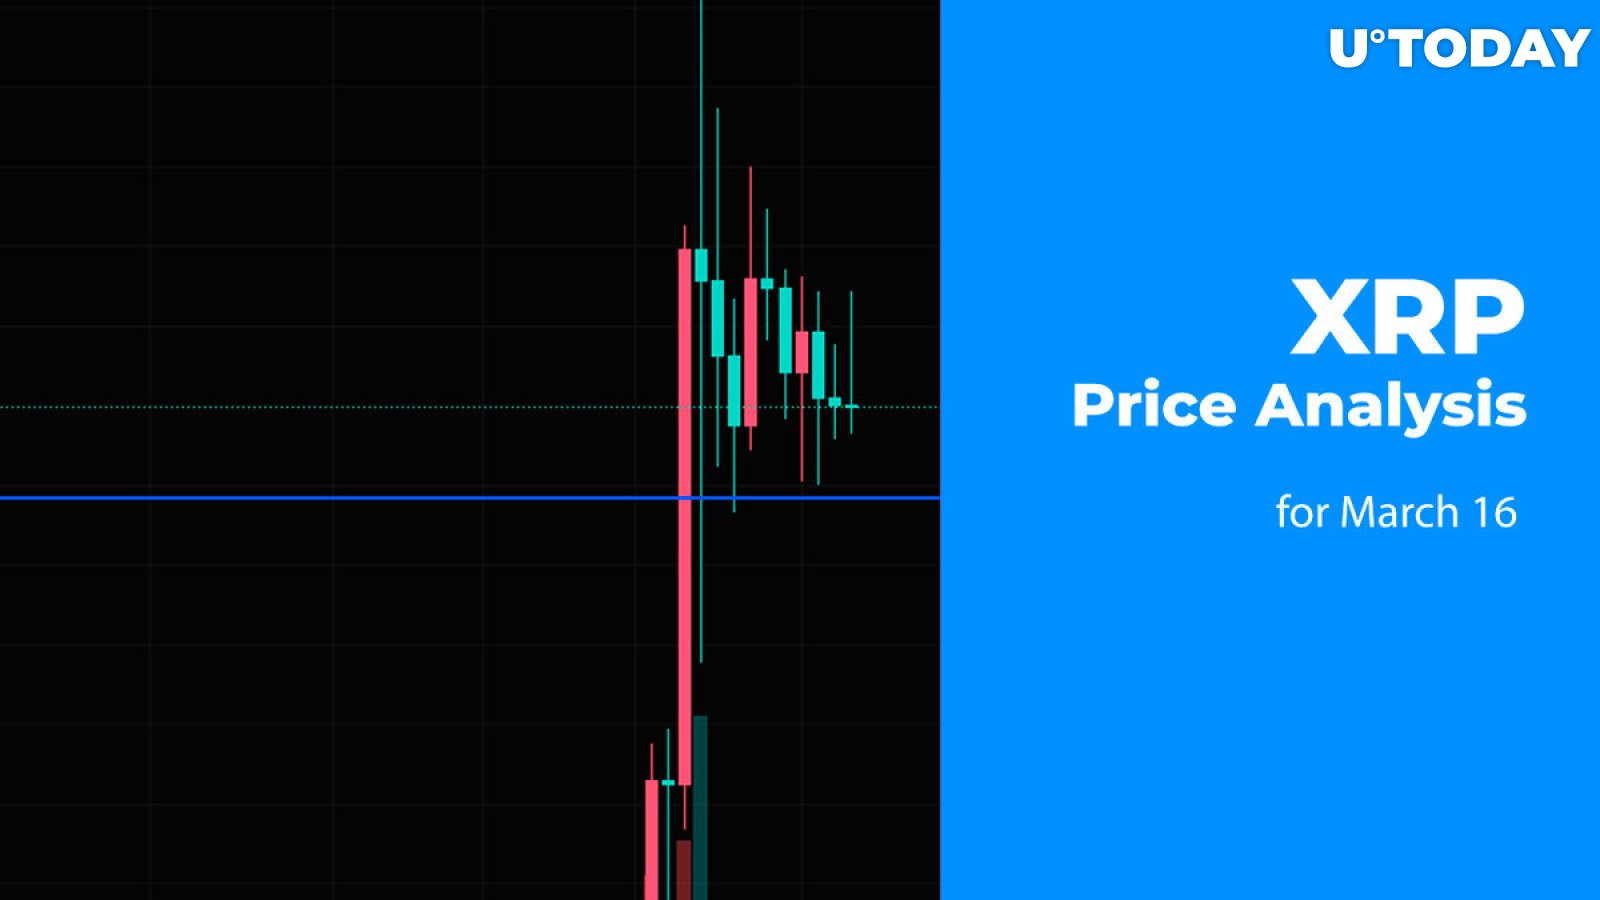 XRP Price Prediction for March 16